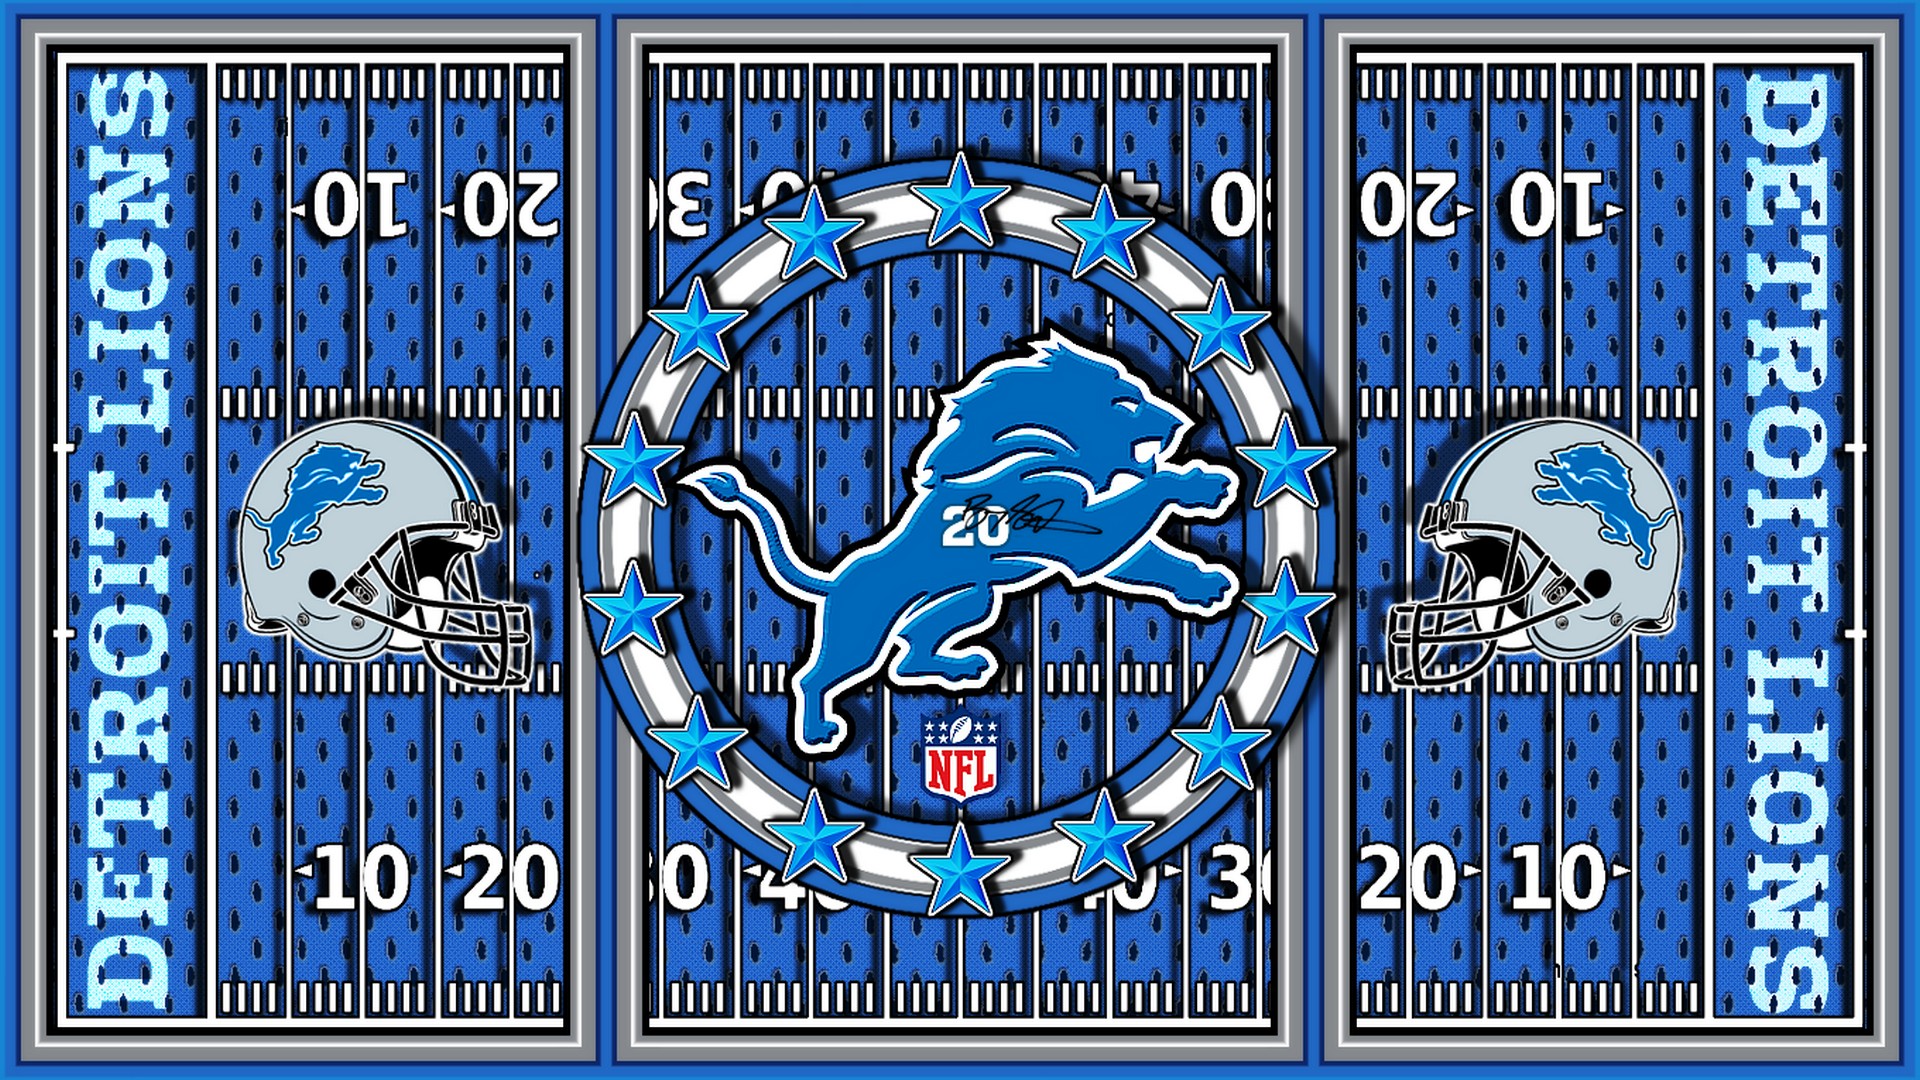 HD Detroit Lions Backgrounds with high-resolution 1920x1080 pixel. Download and set as wallpaper for Desktop Computer, Apple iPhone X, XS Max, XR, 8, 7, 6, SE, iPad, Android